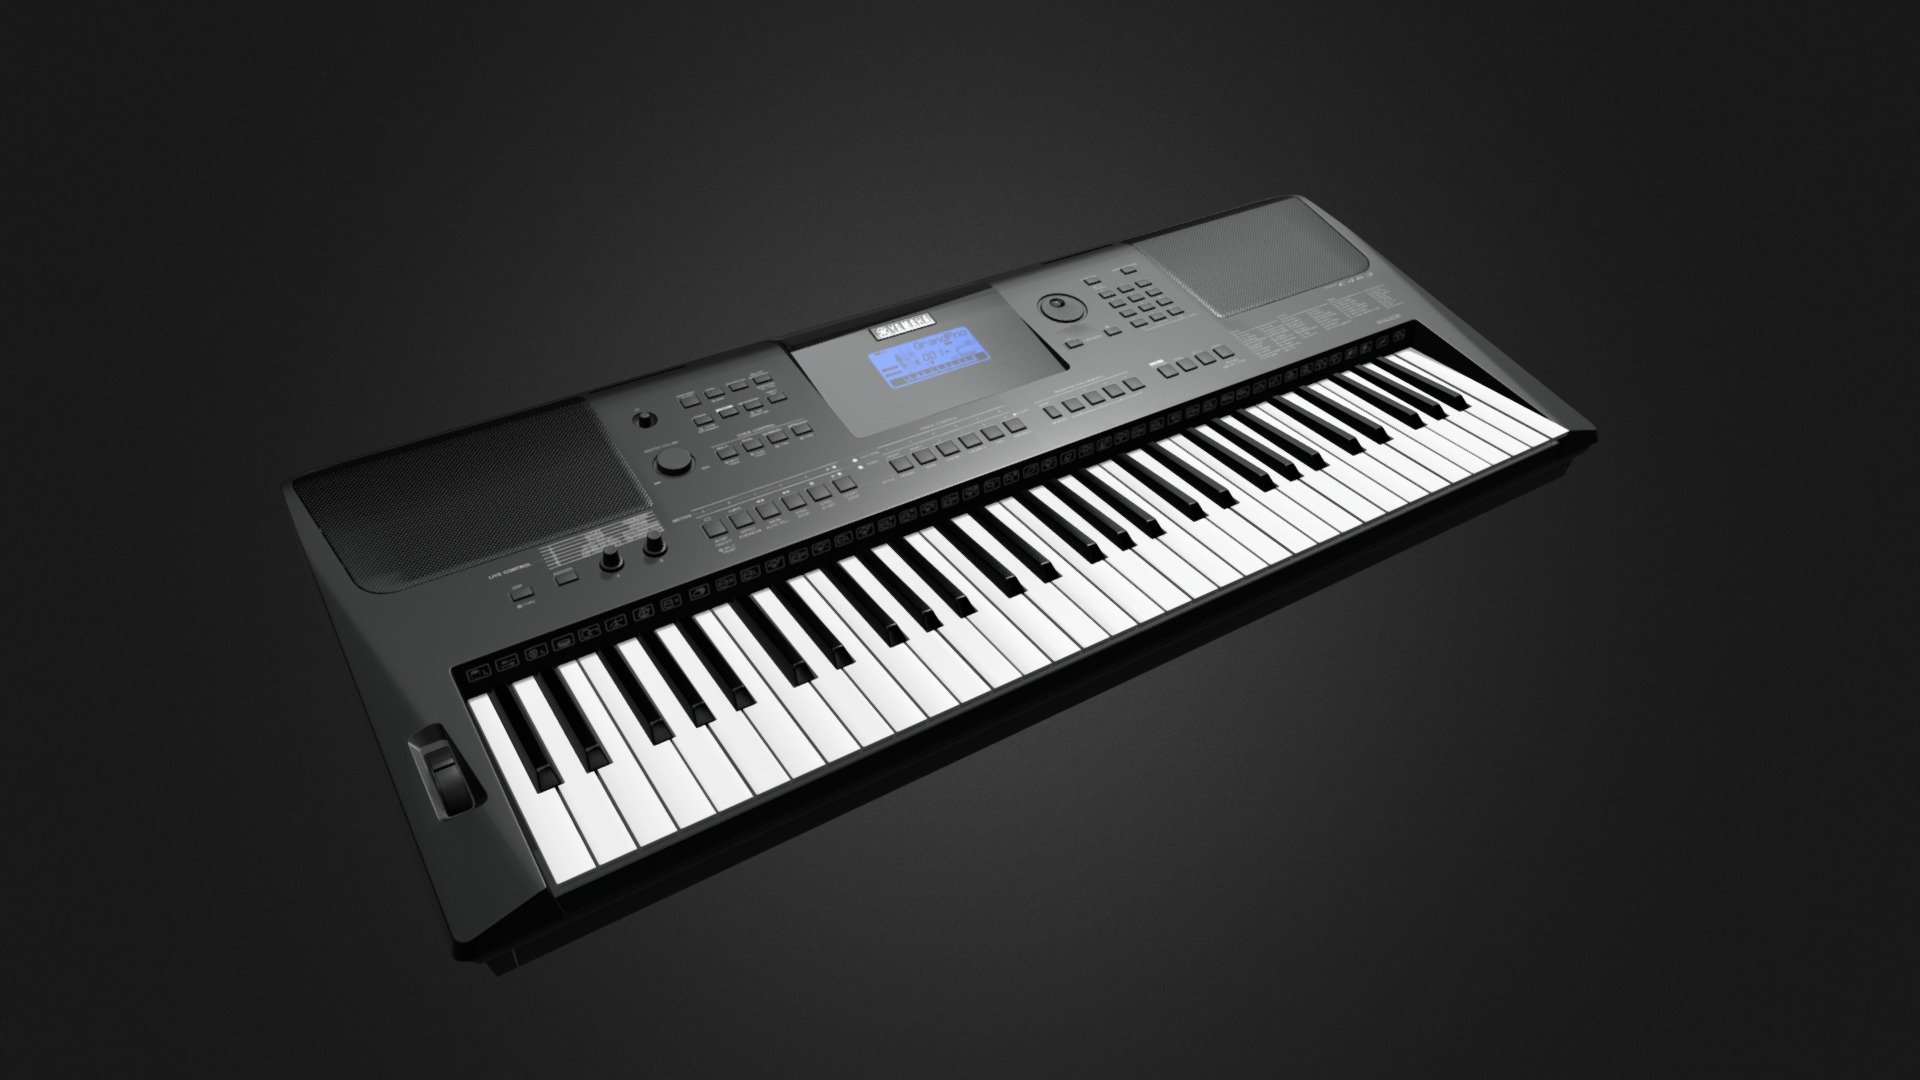 Highly detailed 3D model of Yamaha synthesizer. Low poly mesh, light mesh.
4k pack textures
Repeated all the characters printed on the original 3d model